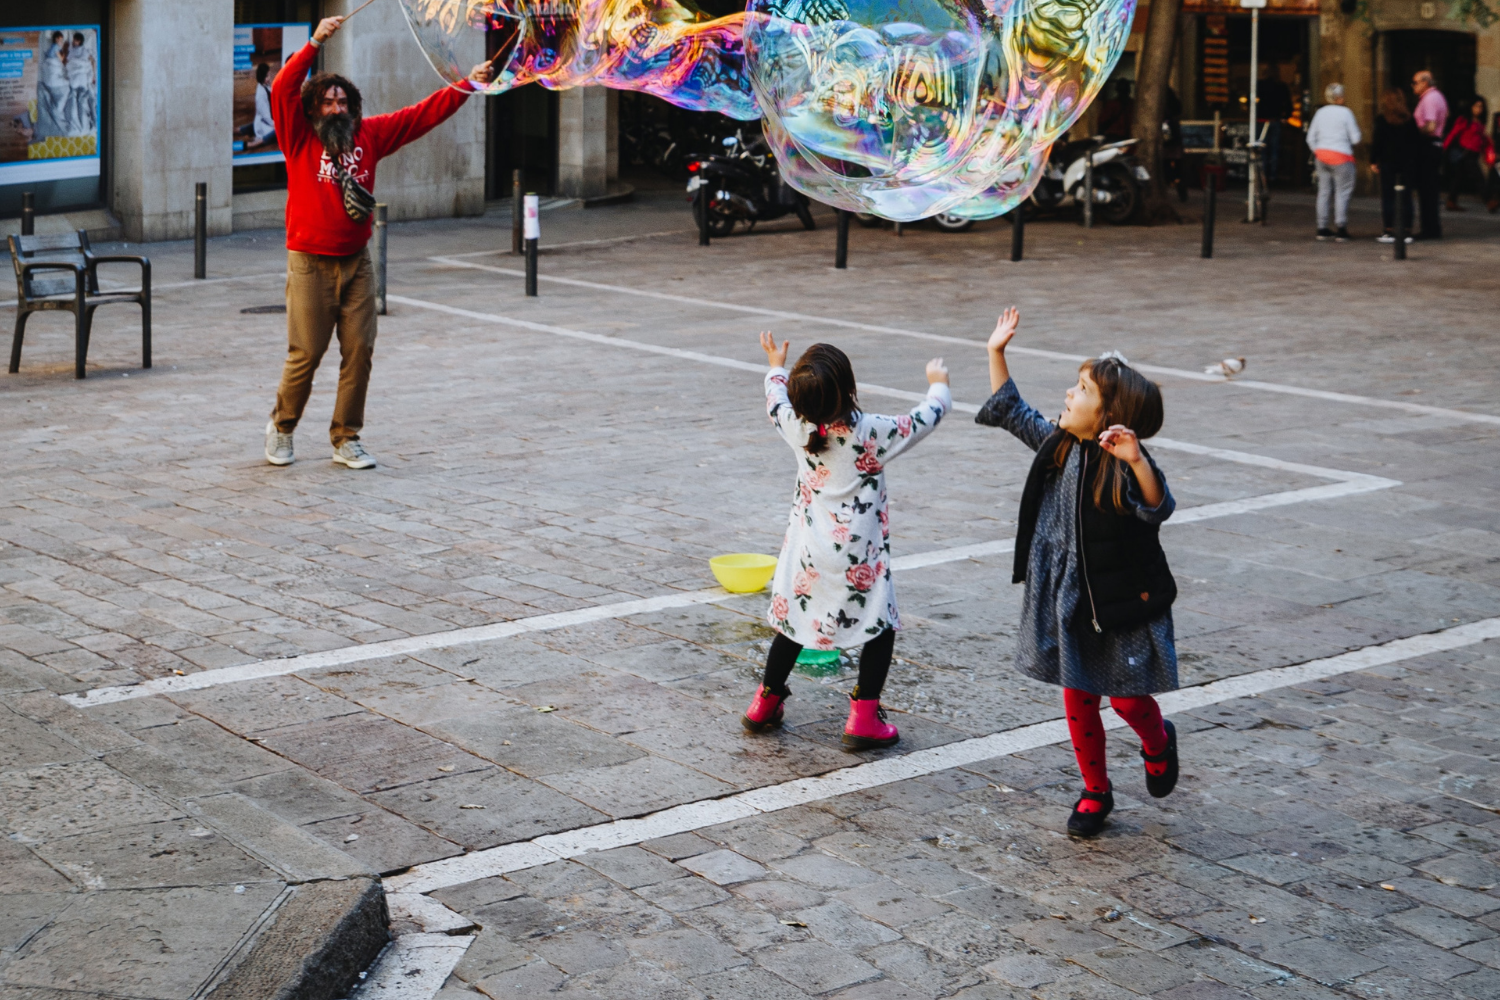 happy children running around a plaza, playing with large bubbles